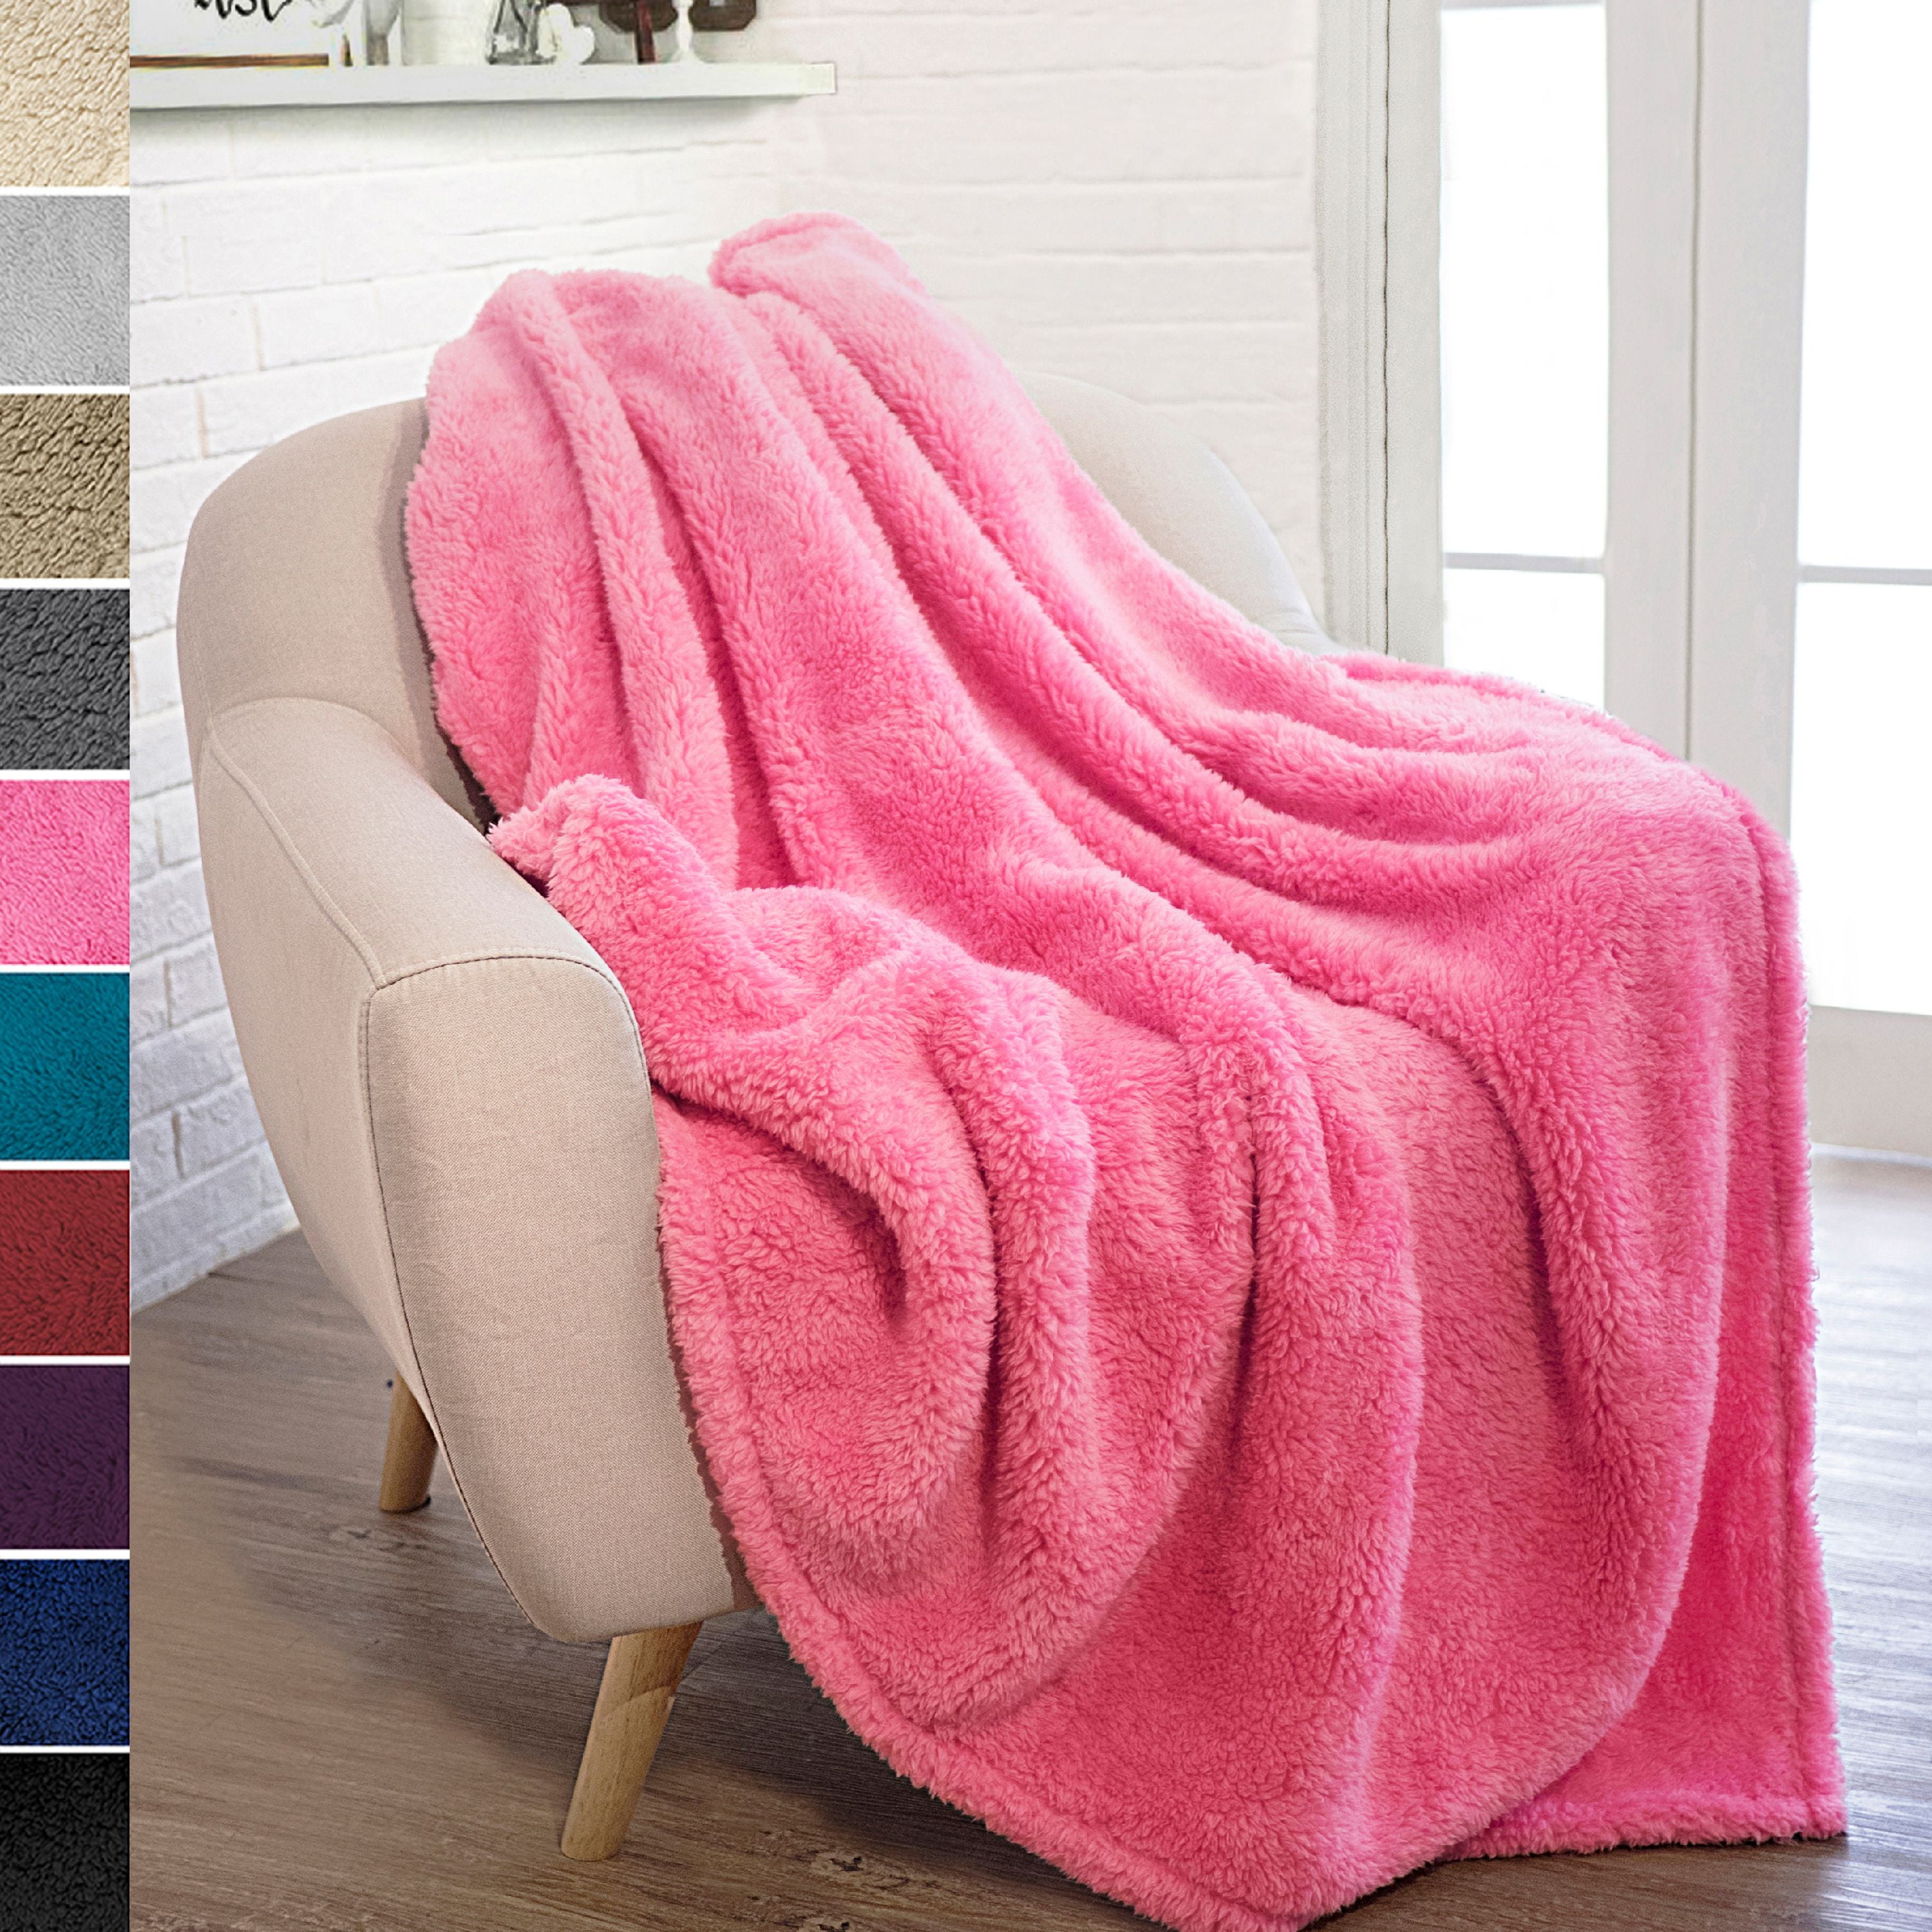 Premium Sherpa Fleece Blanket 50'' x 60'' Fit for Sofa Chair Bed Office Travelling Camping Gift Fluffy LOONG DESIGN Pink Pig Throw Blanket Super Soft 